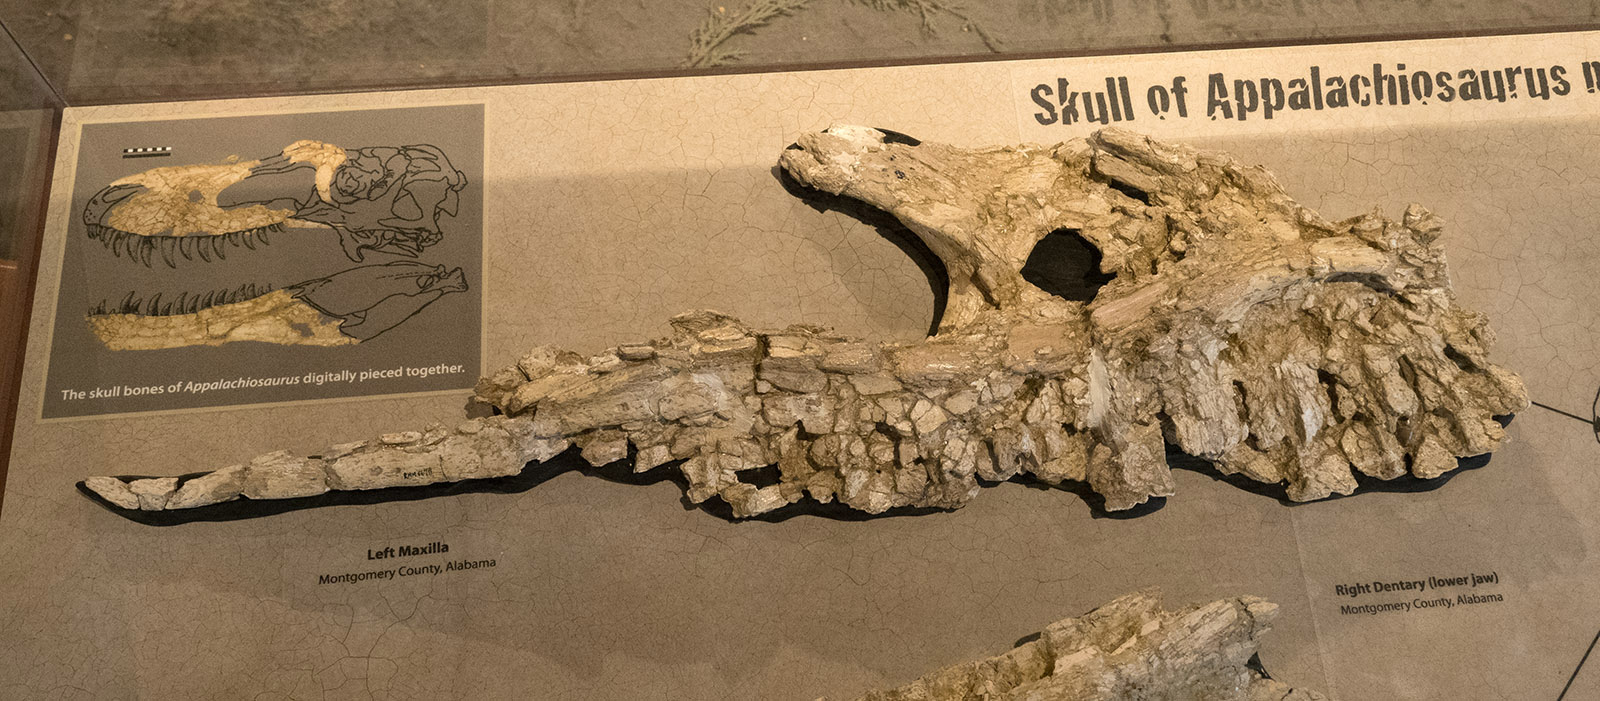 Reproduction of fossils found and their location in the skull of Appalachiosaurus mongomeriensis.  McWane Science Center